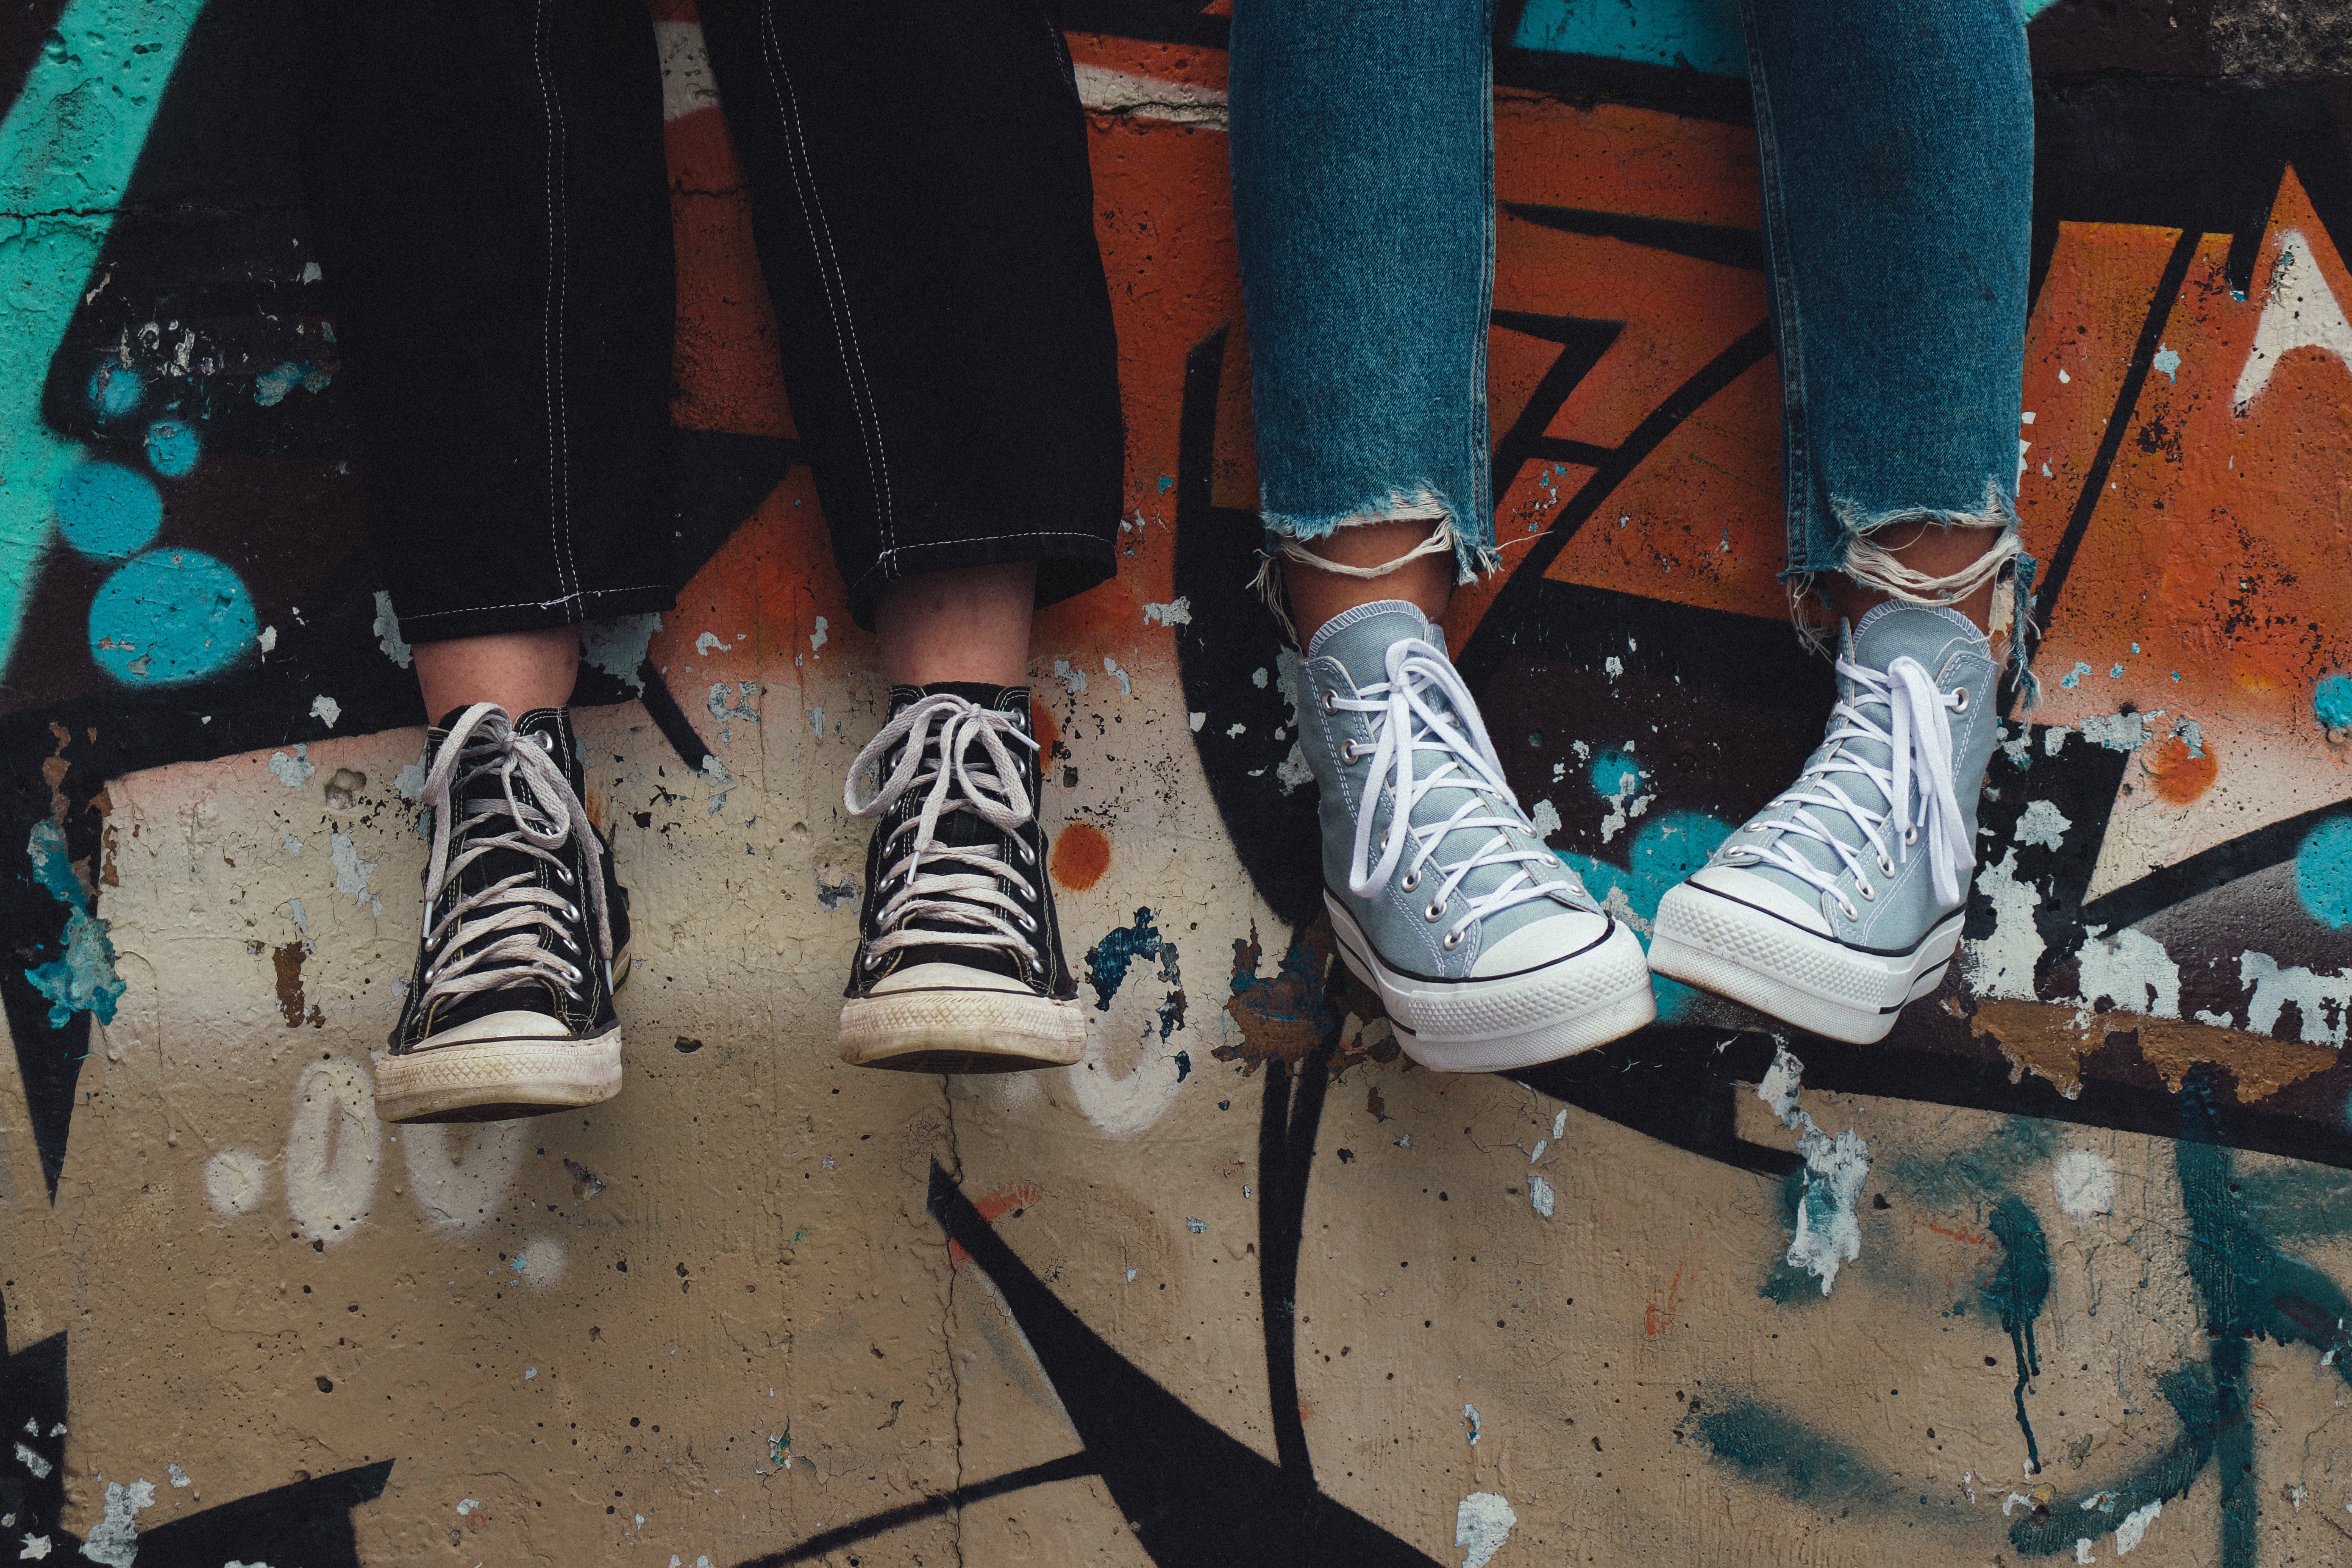 Lucy Trent knew the kind of trouble teenagers could get into. | Source: Unsplash